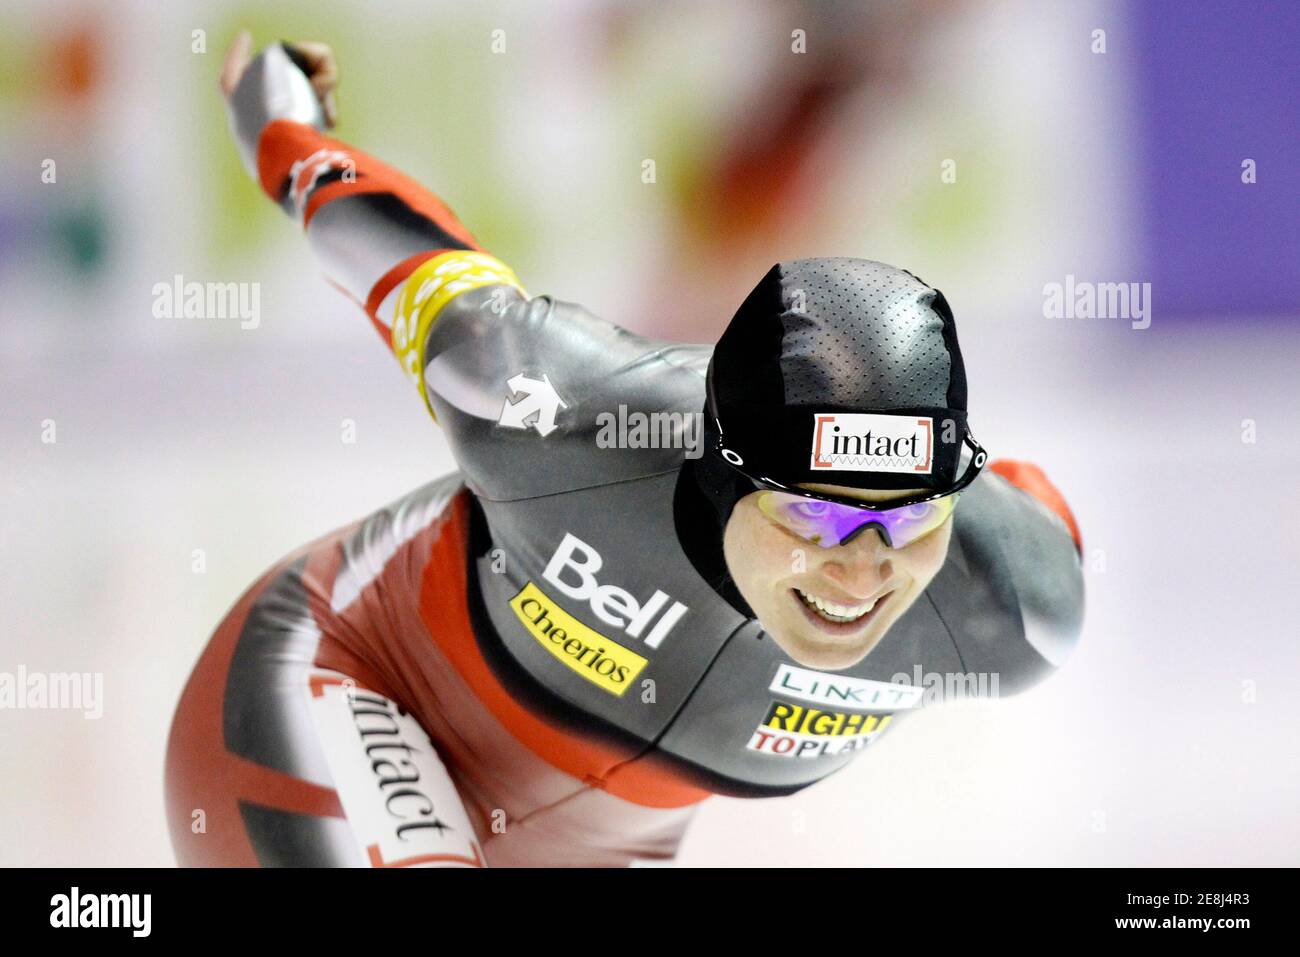 Canada's Kristina Groves skates to win the overall women's 1500 metres ISU World Cup Speed Skating finals at Thialf Stadium in Heerenveen March 13, 2010.   REUTERS/Jerry Lampen (NETHERLANDS - Tags: SPORT SPEED SKATING) Stock Photo